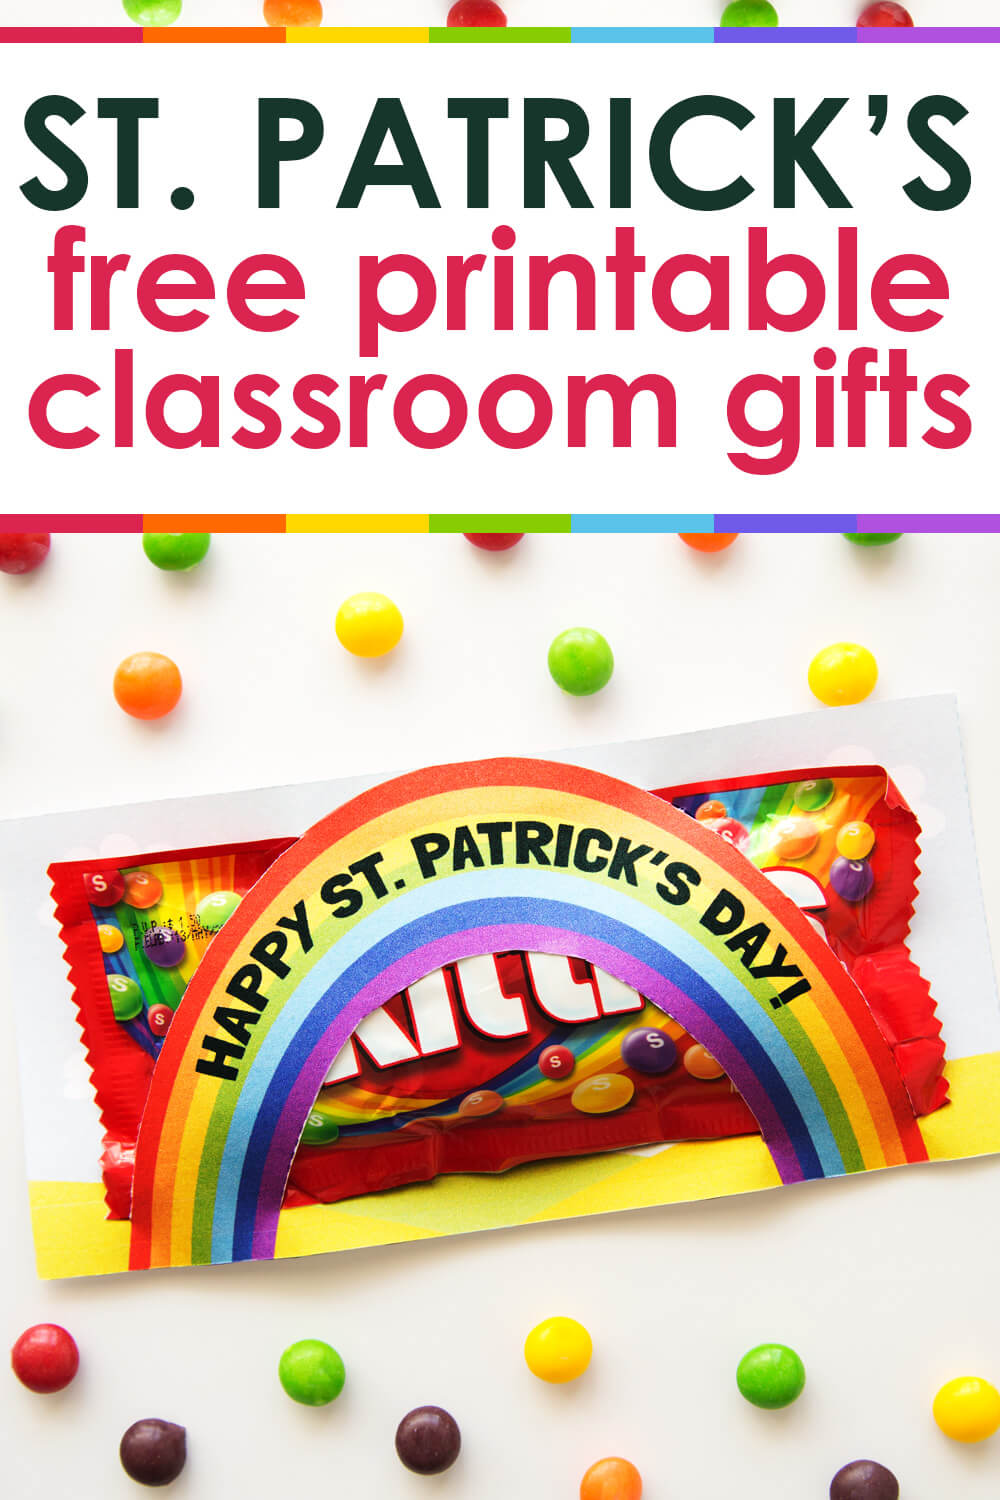 St. Patrick's Day Free Printable Classroom Gifts